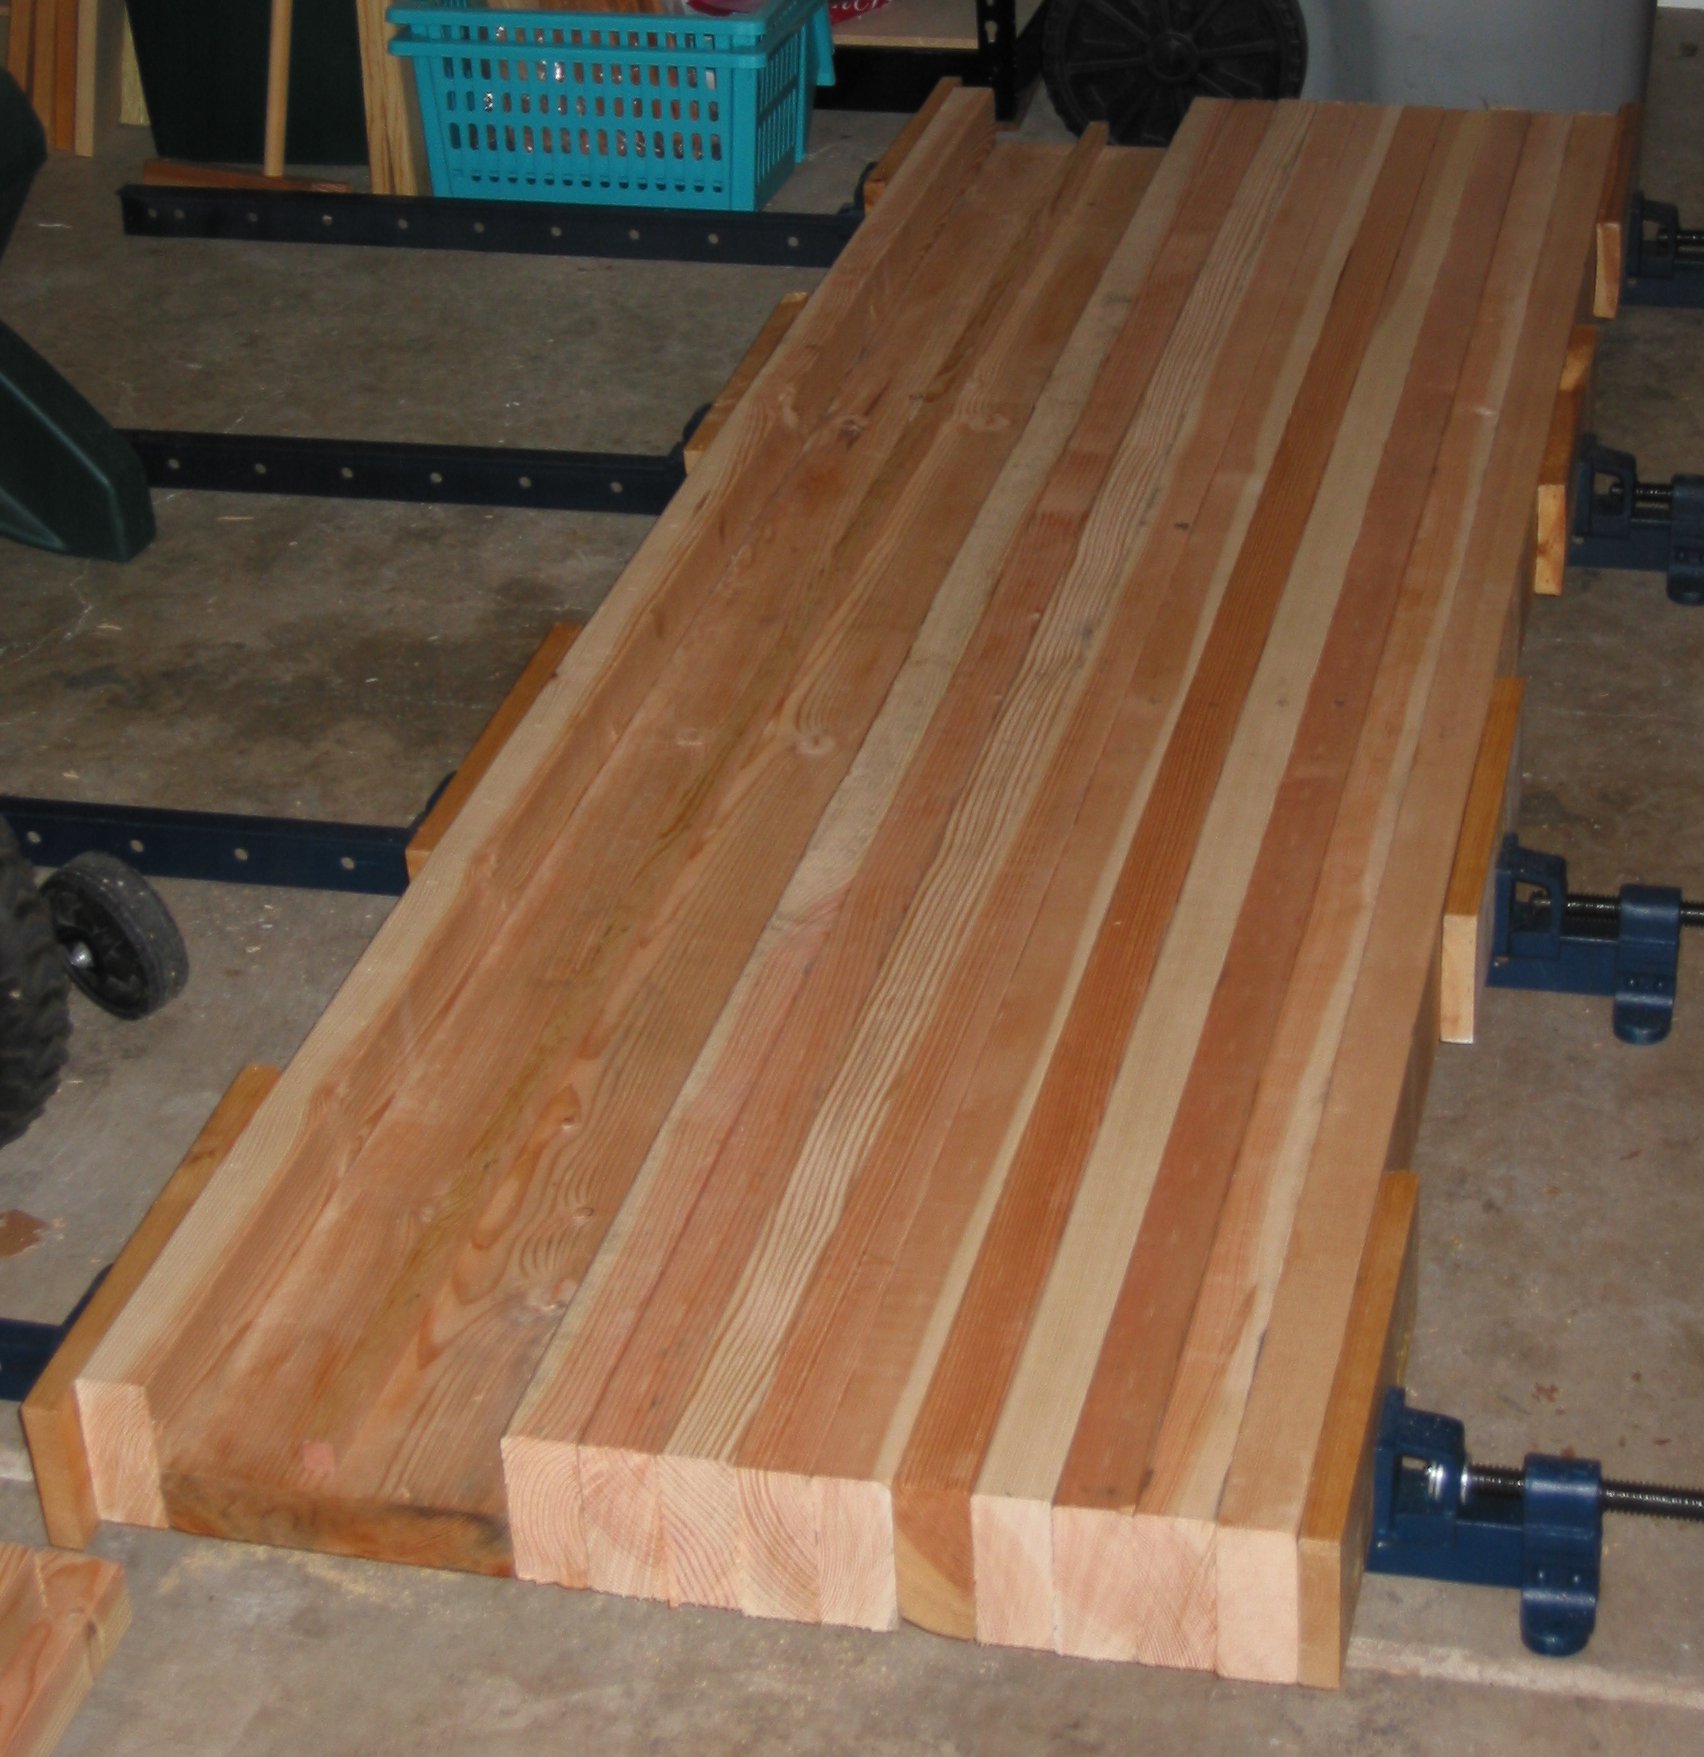 Woodworking 2x4 woodworking bench PDF Free Download